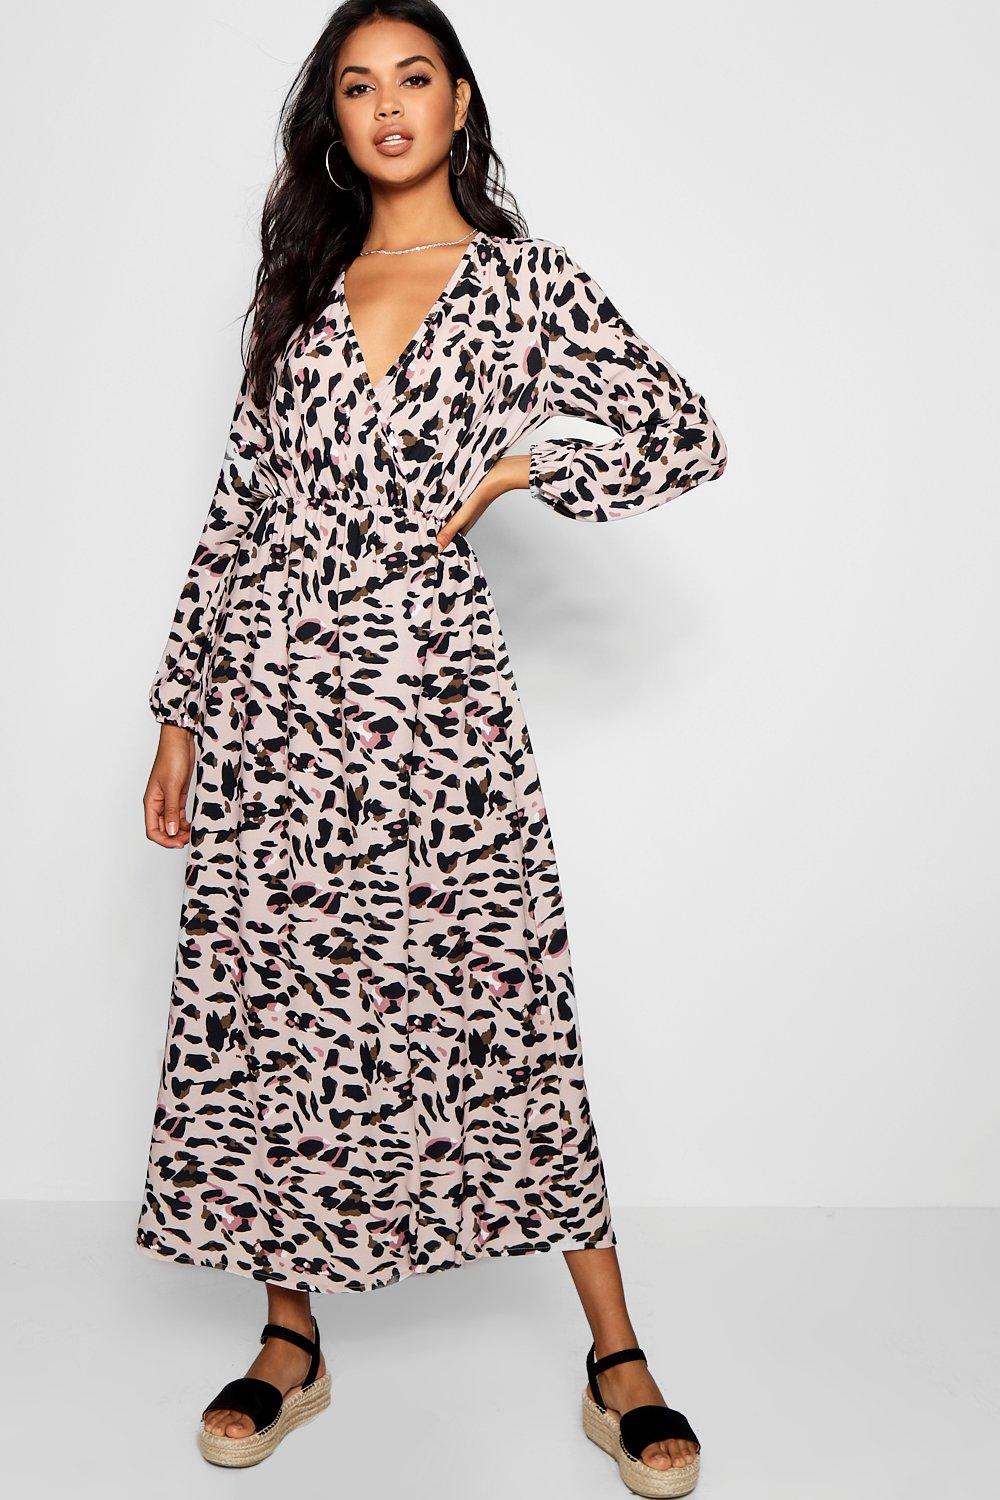 leopard print maxi dress with sleeves